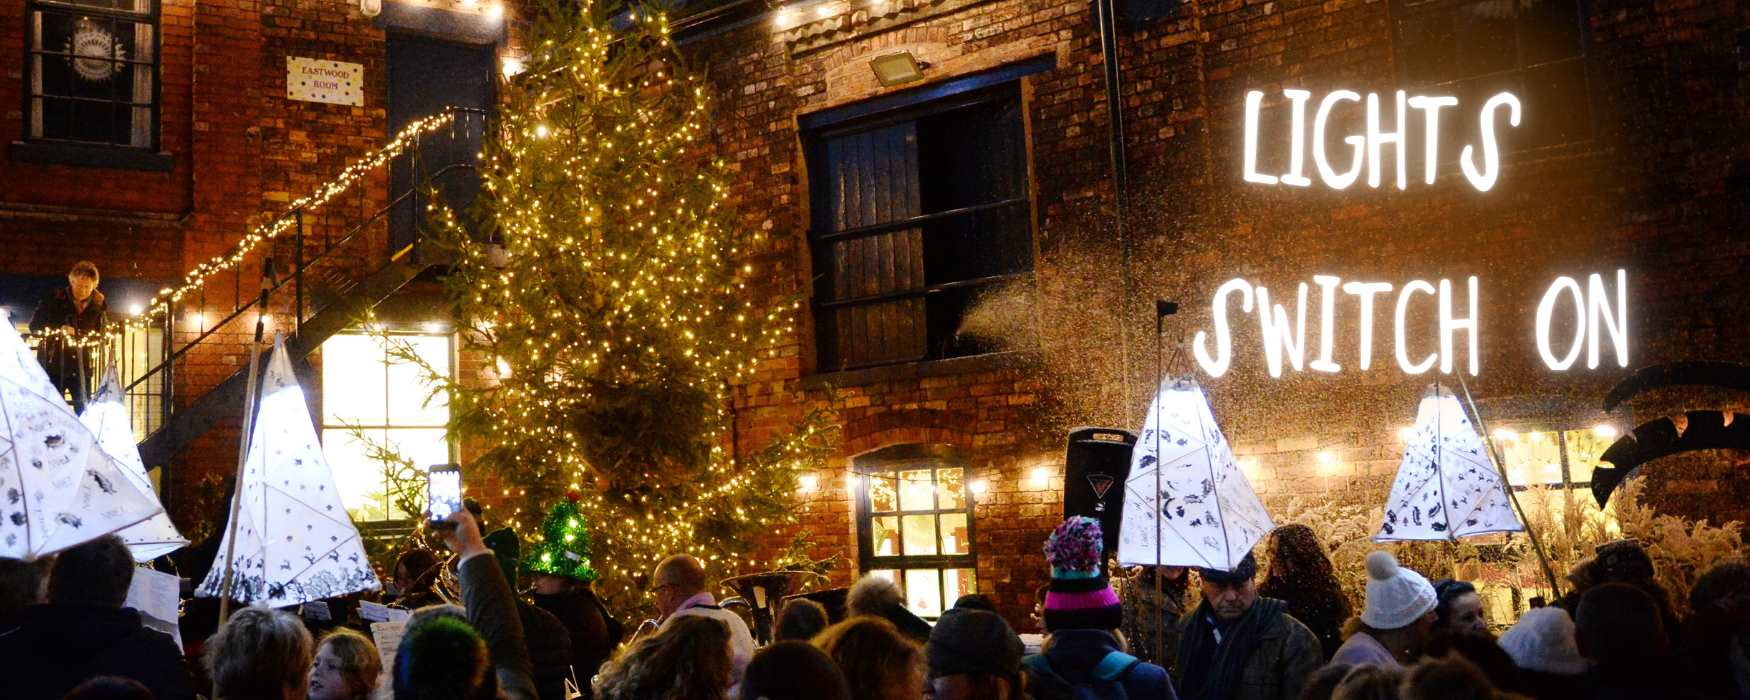 Christmas Lights Switch On Events in Stoke-on-Trent